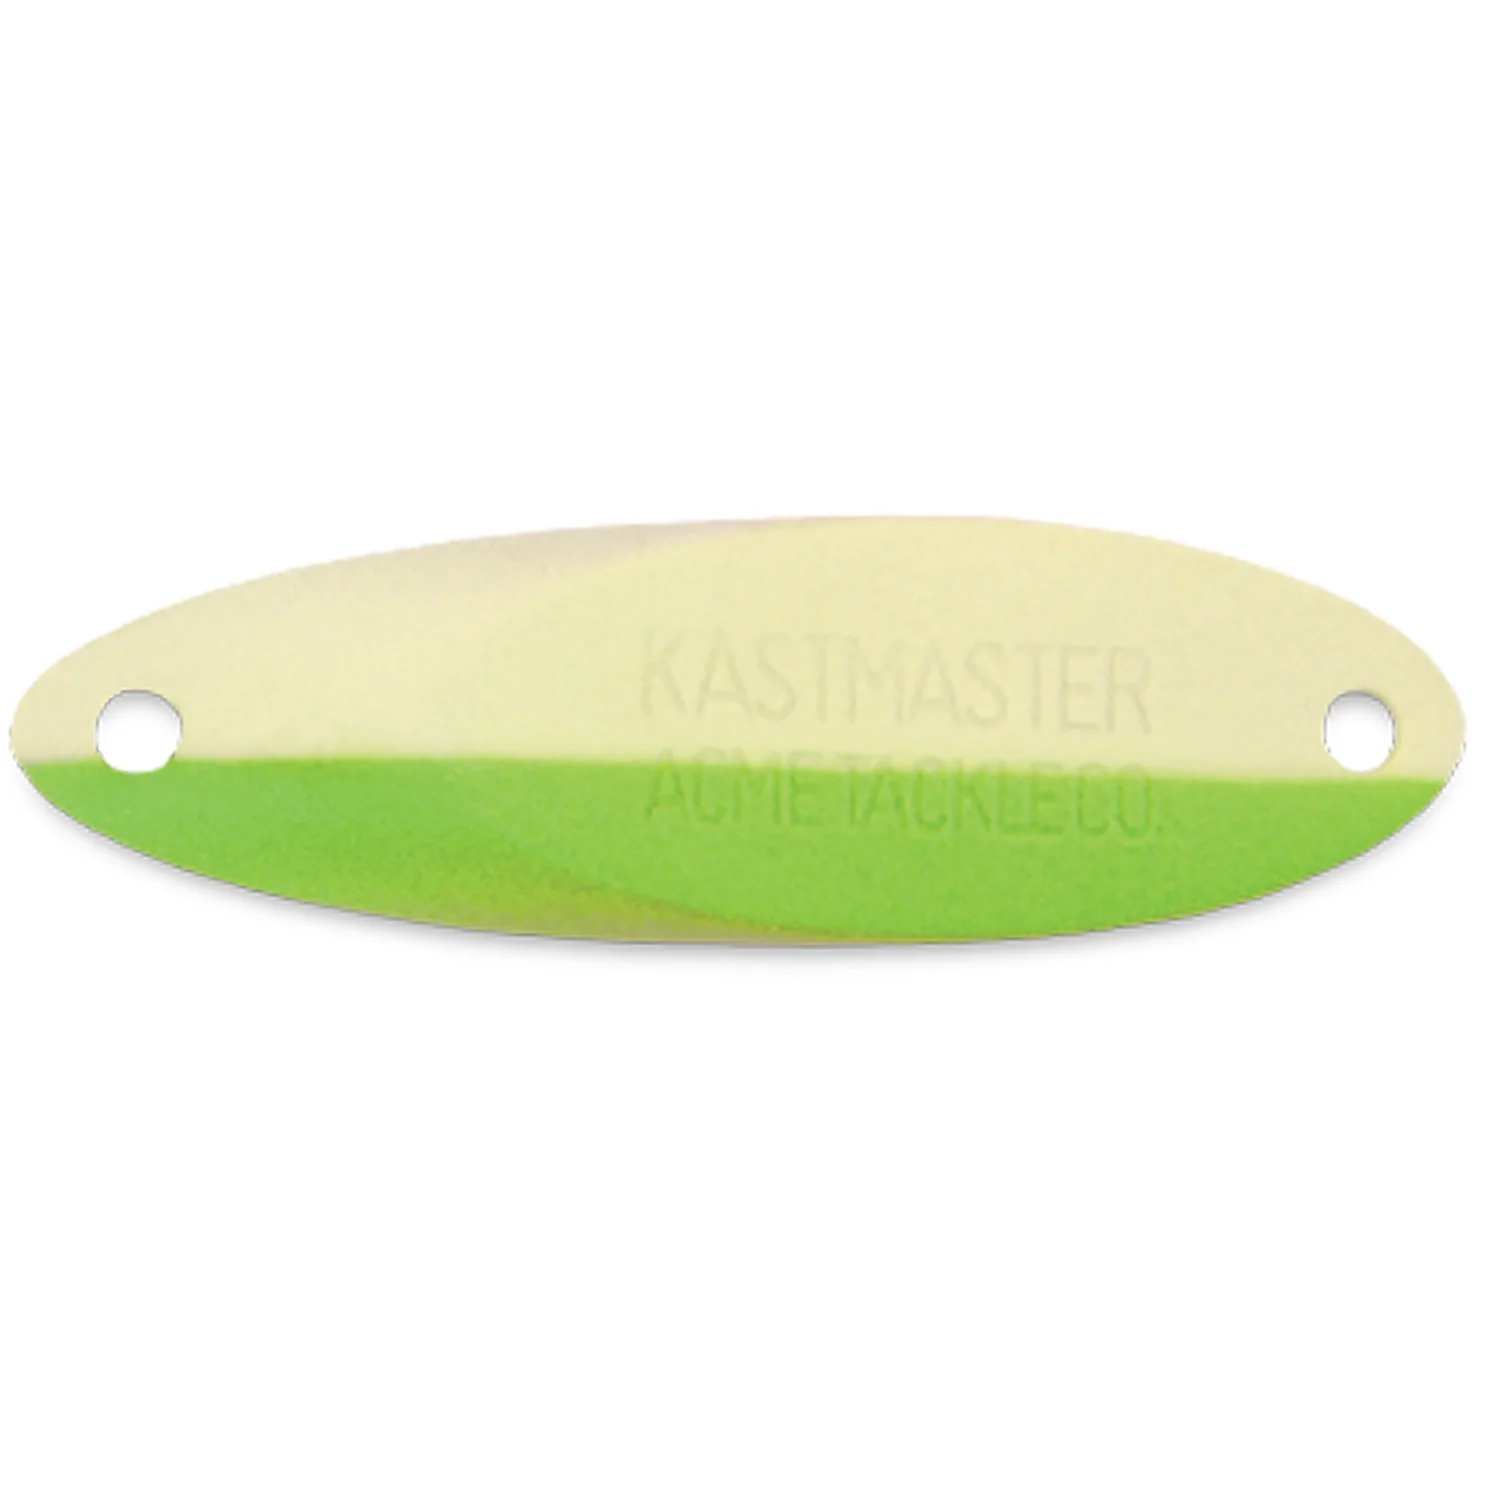 Acme Kastmaster 1/2 oz – Jack Traps Ice Fishing Traps and Tip Ups